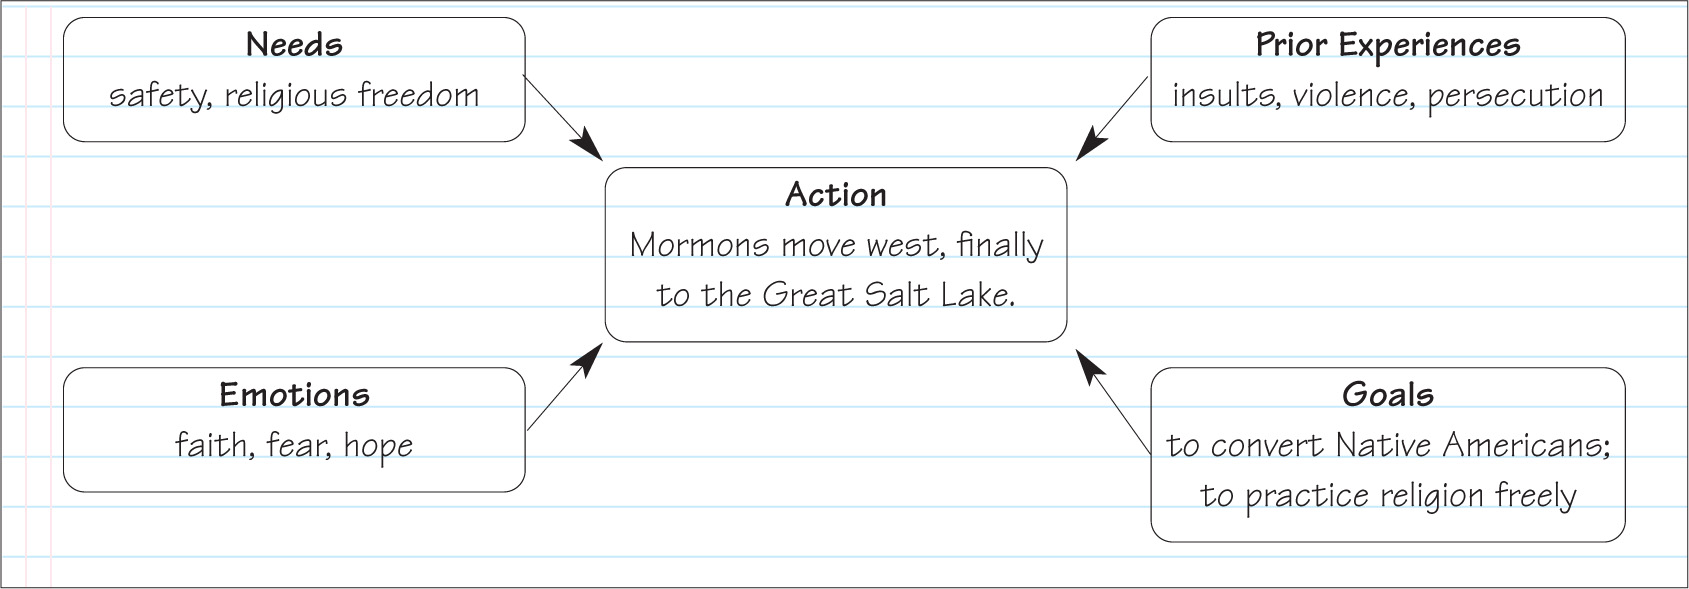 A diagram shows the Needs, Emotions, Actions, Prior Experiences and Goals of the Mormons.